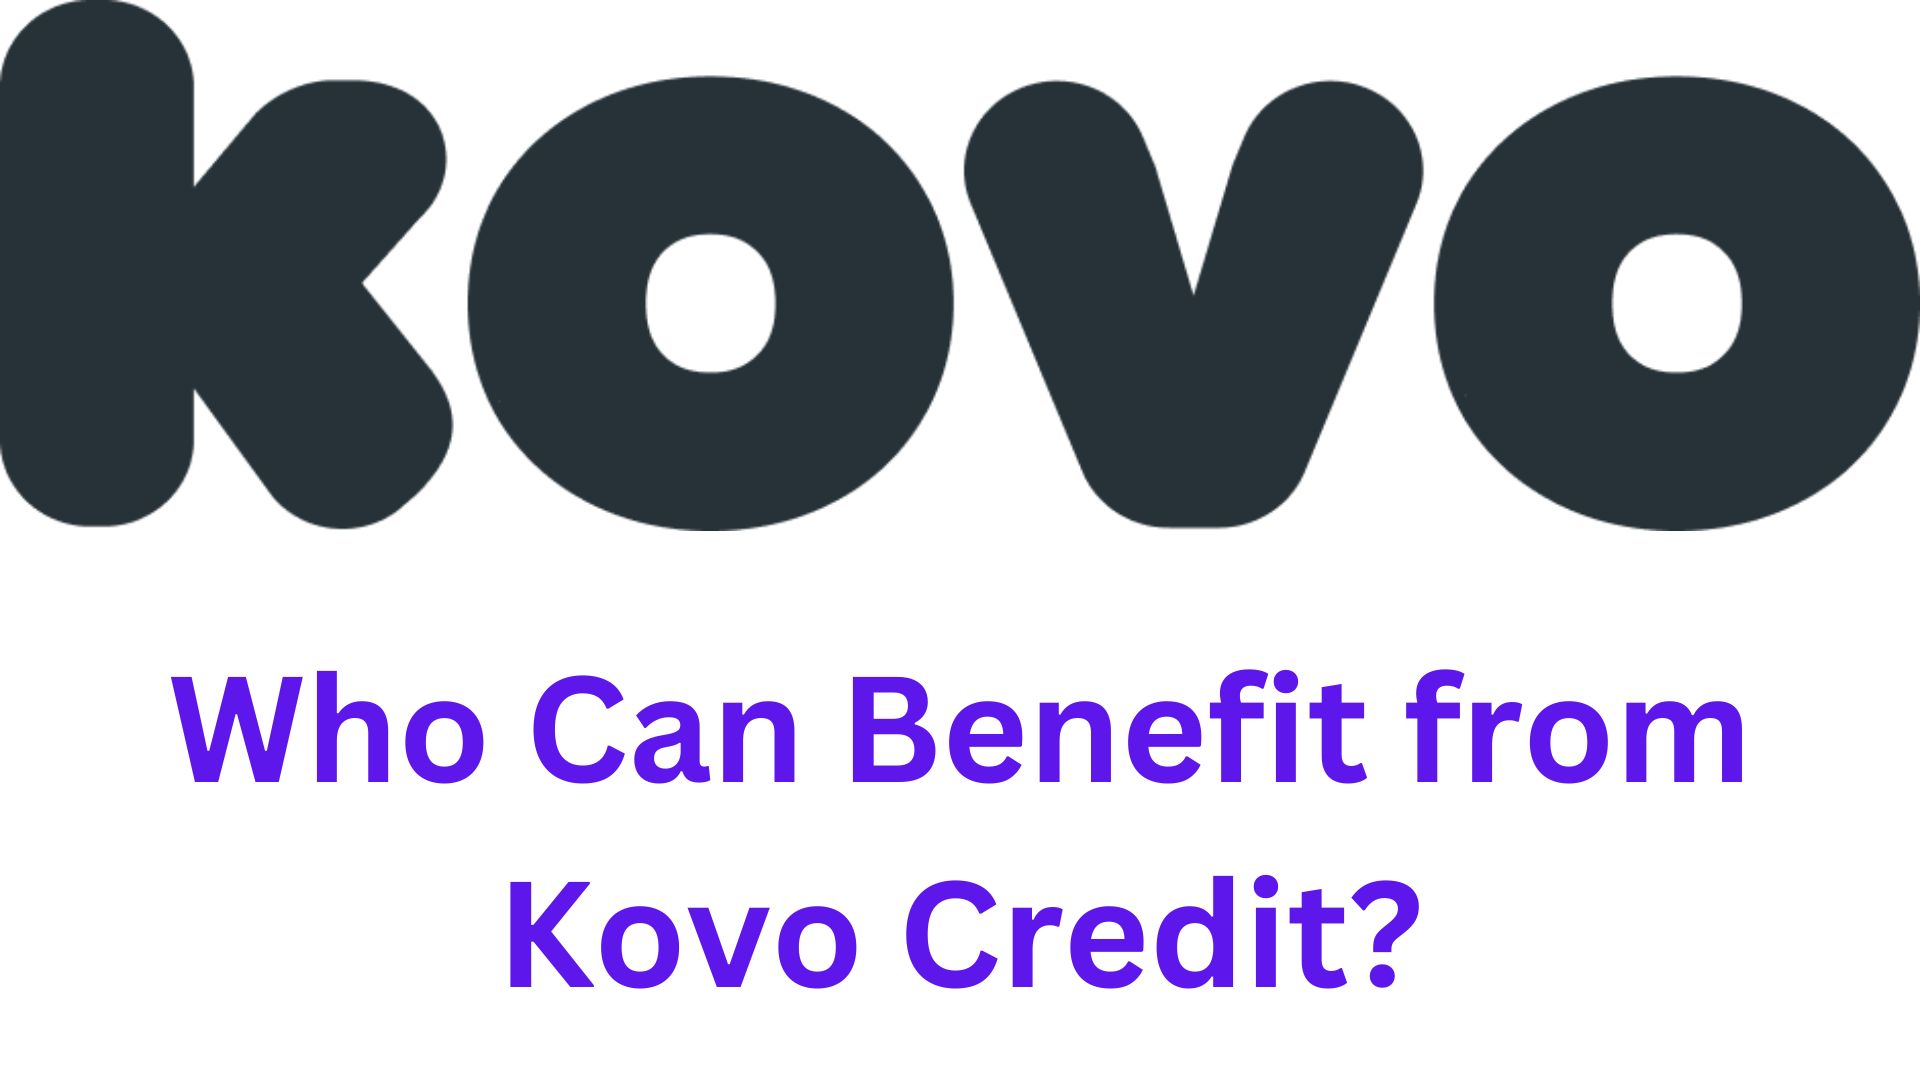 Who Can Benefit from Kovo Credit?